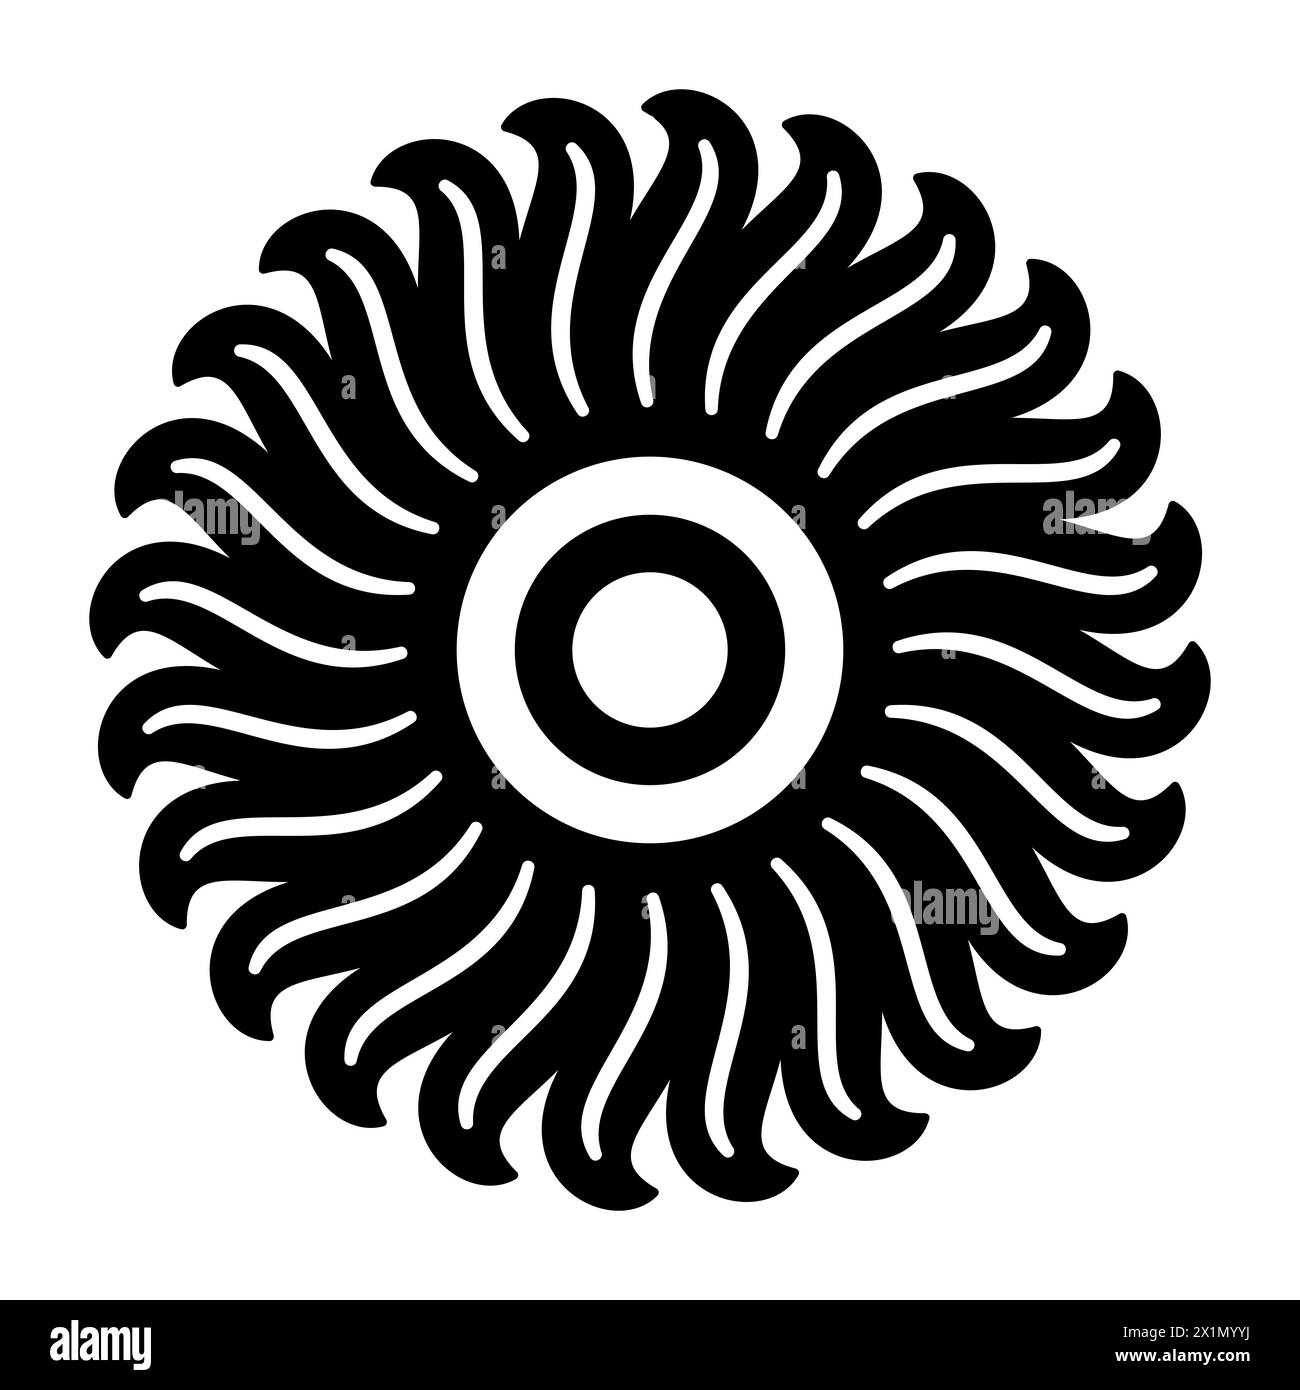 Floral motif and sun symbol. Solar sign, a circle surrounded by twenty-four flames or rays of light. Or also a blossom with petals.Black and white. Stock Photo